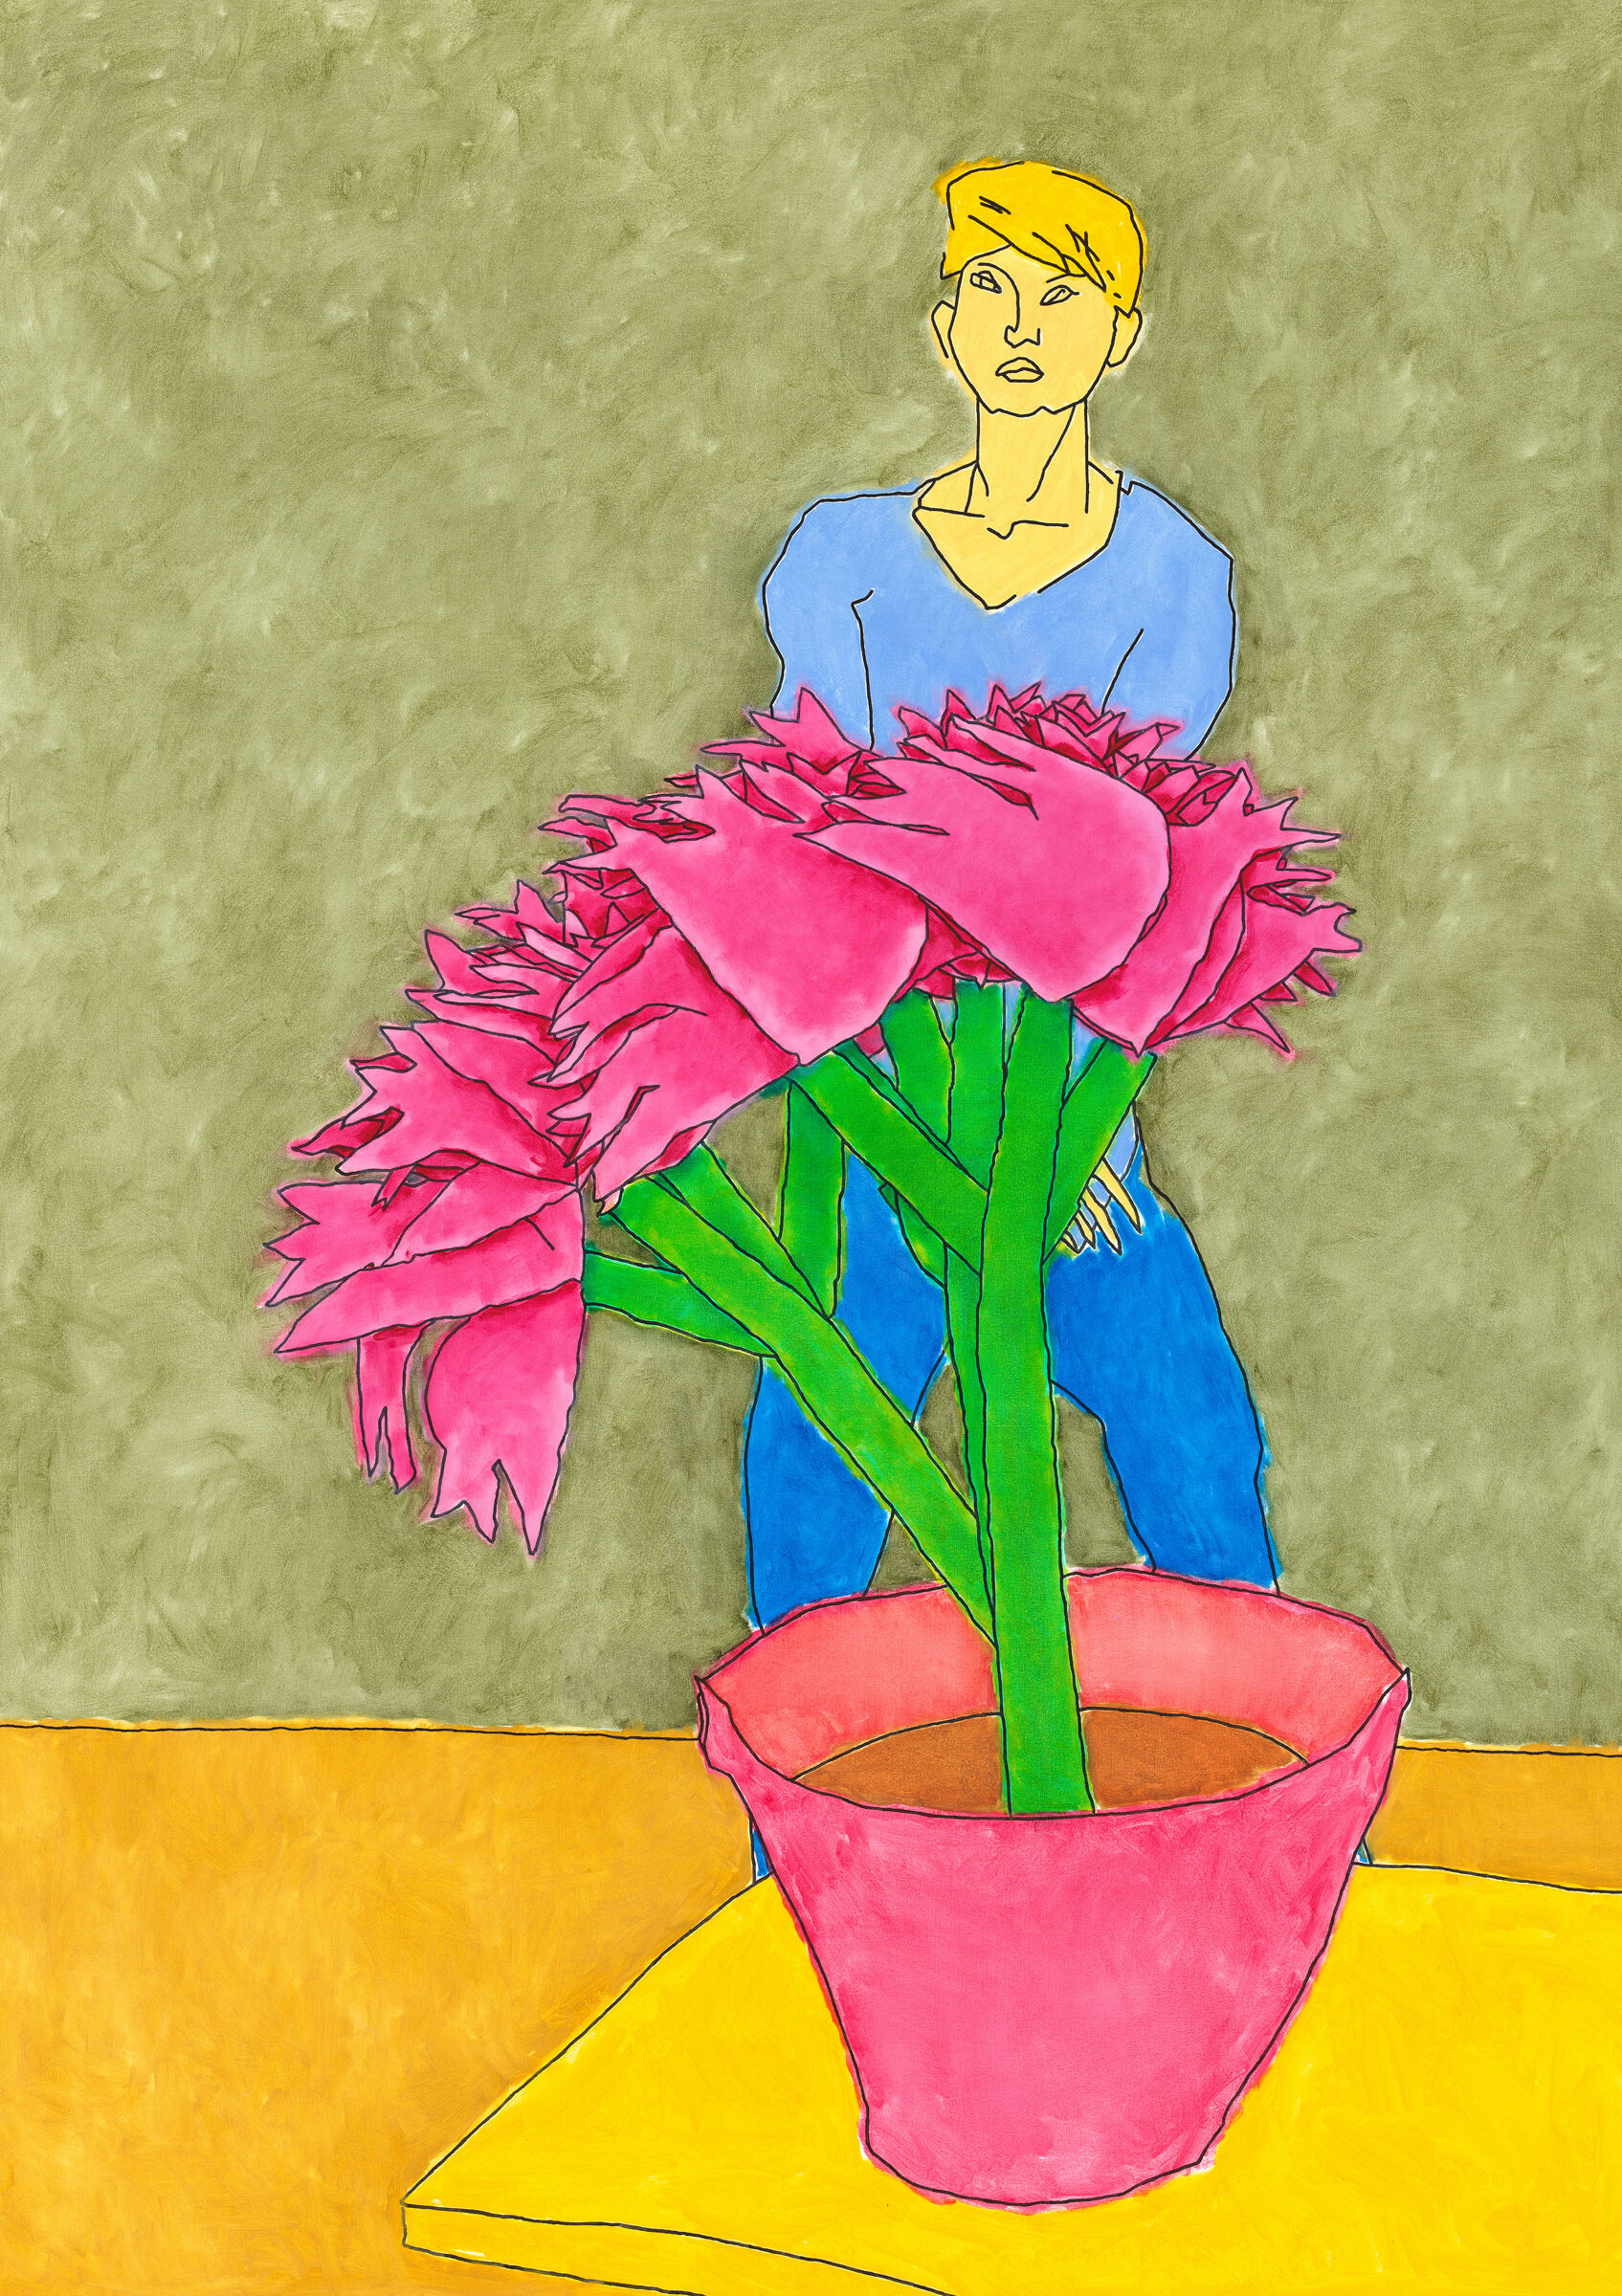 Illustration of a person in blue standing behind oversized pink flowers in a red pot, with a textured grey background.